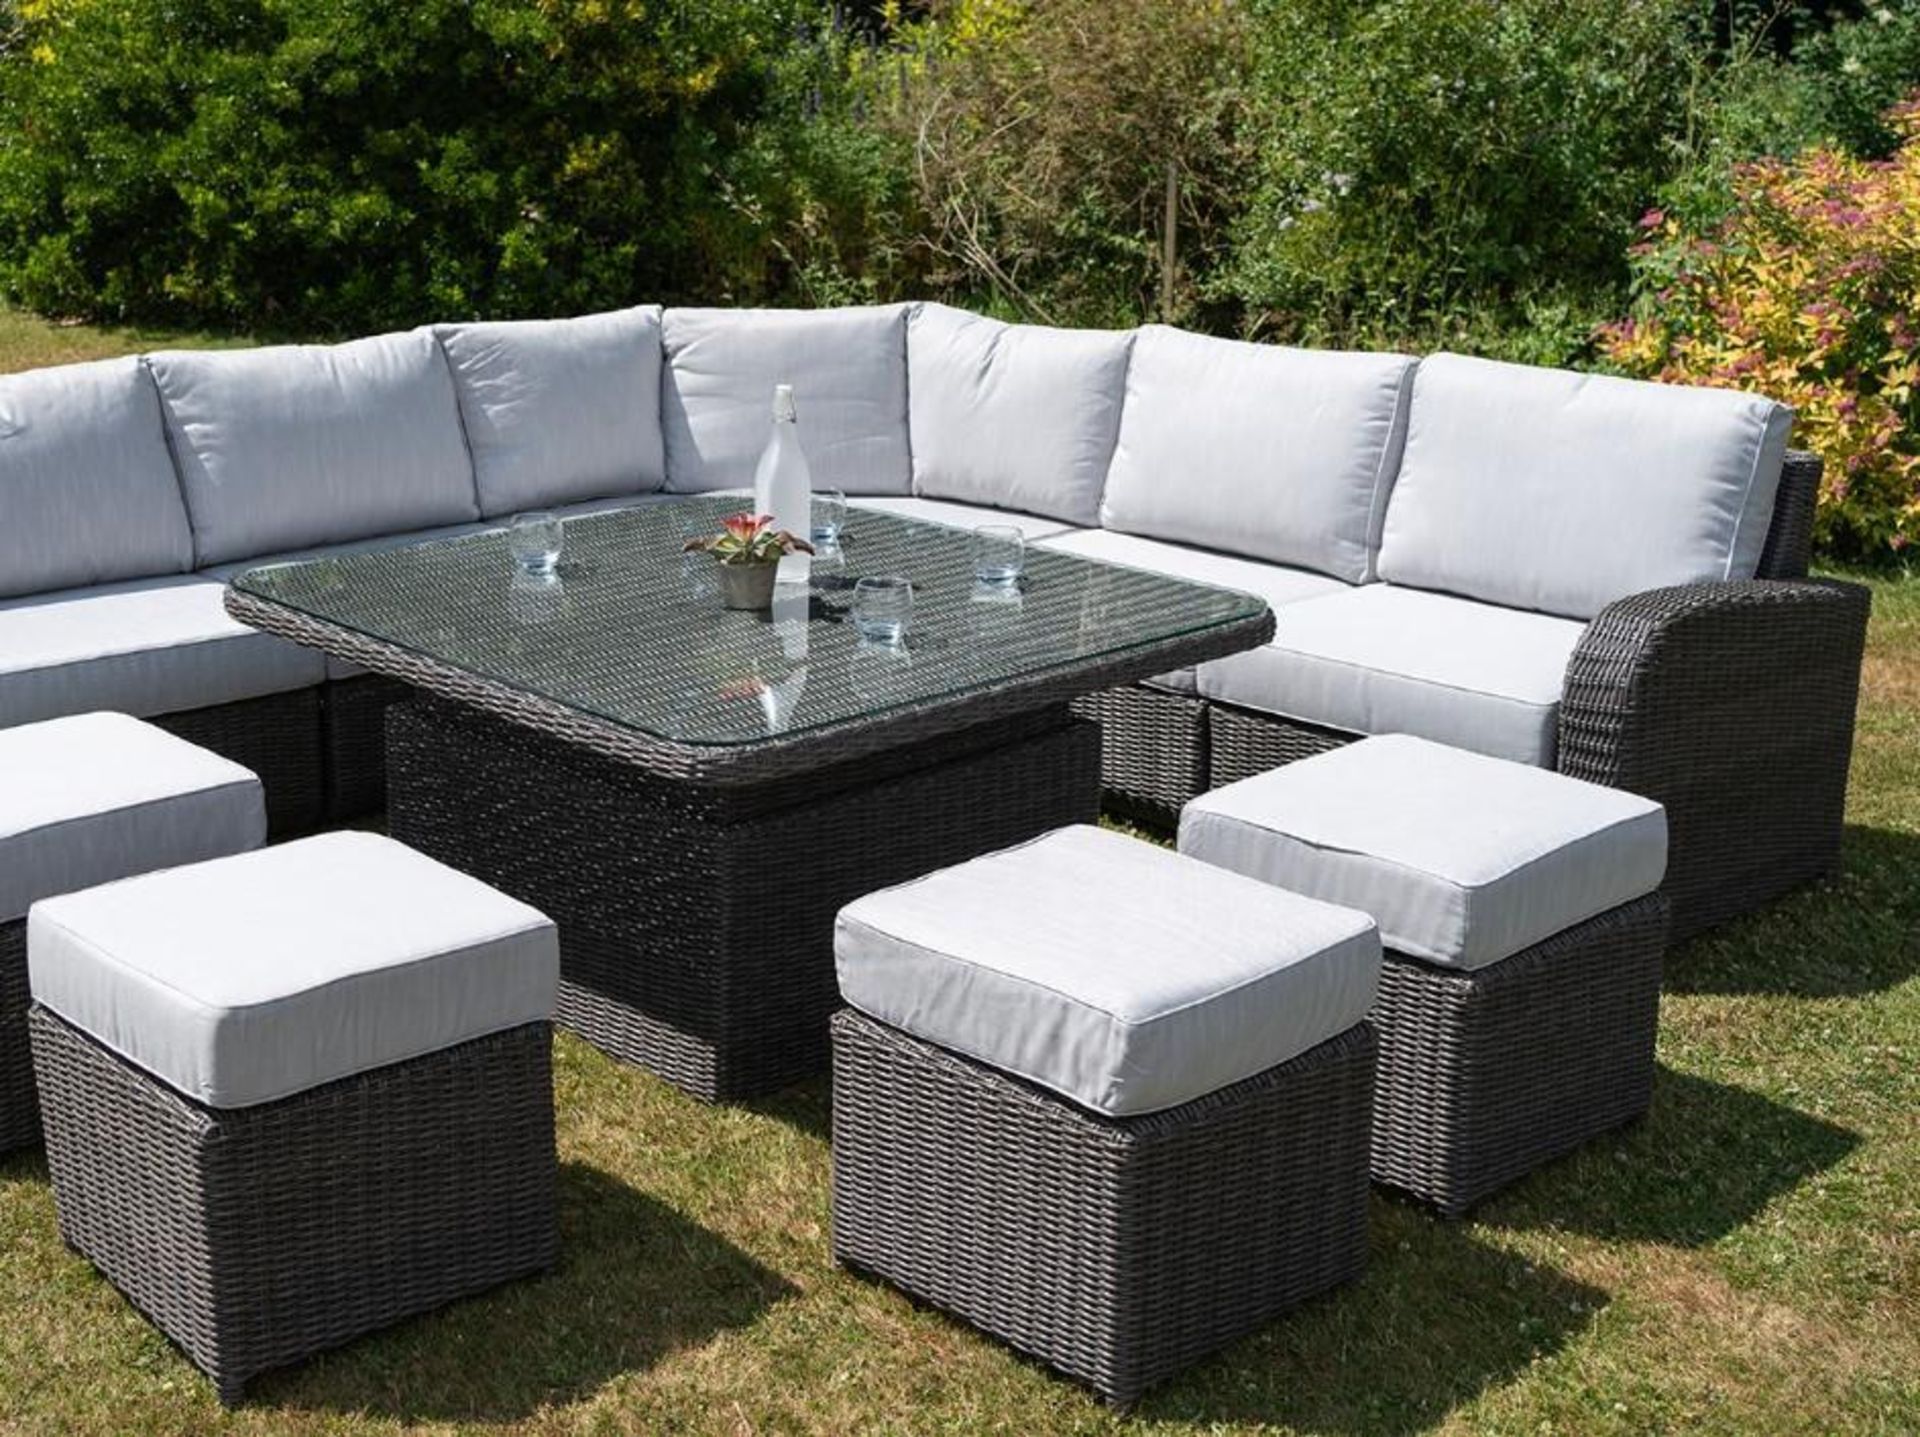 Brand New Moda Furniture, 10 Seater Outdoor Rise and Fall Table Dining Set in Grey with Grey